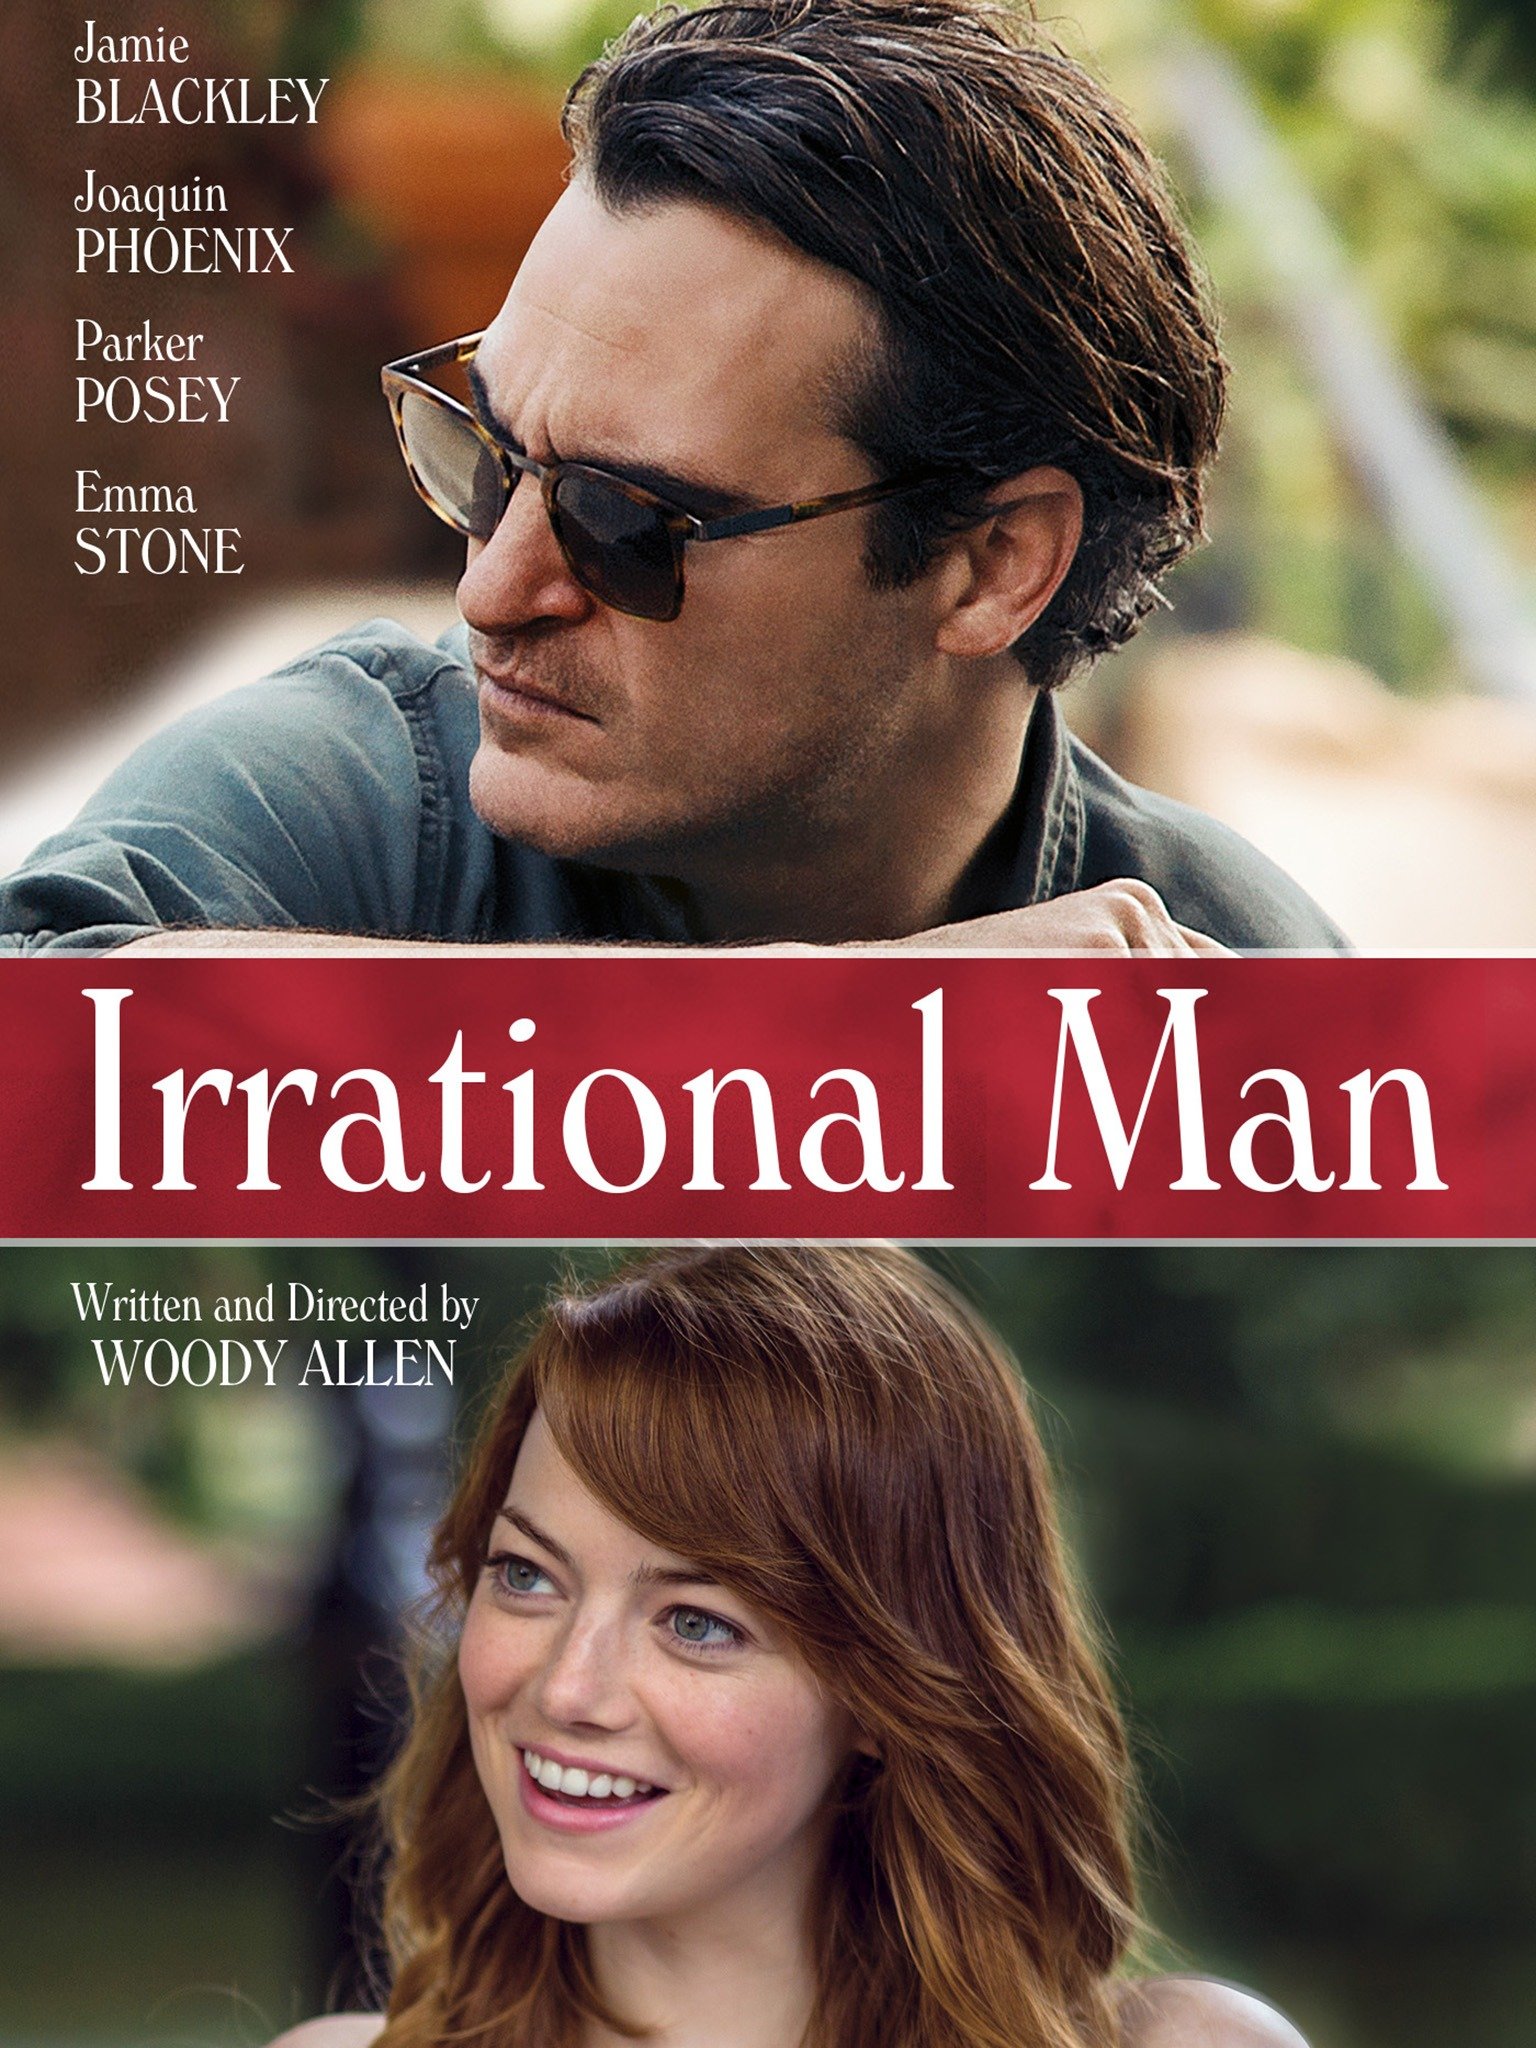 irrational man movie review rotten tomatoes